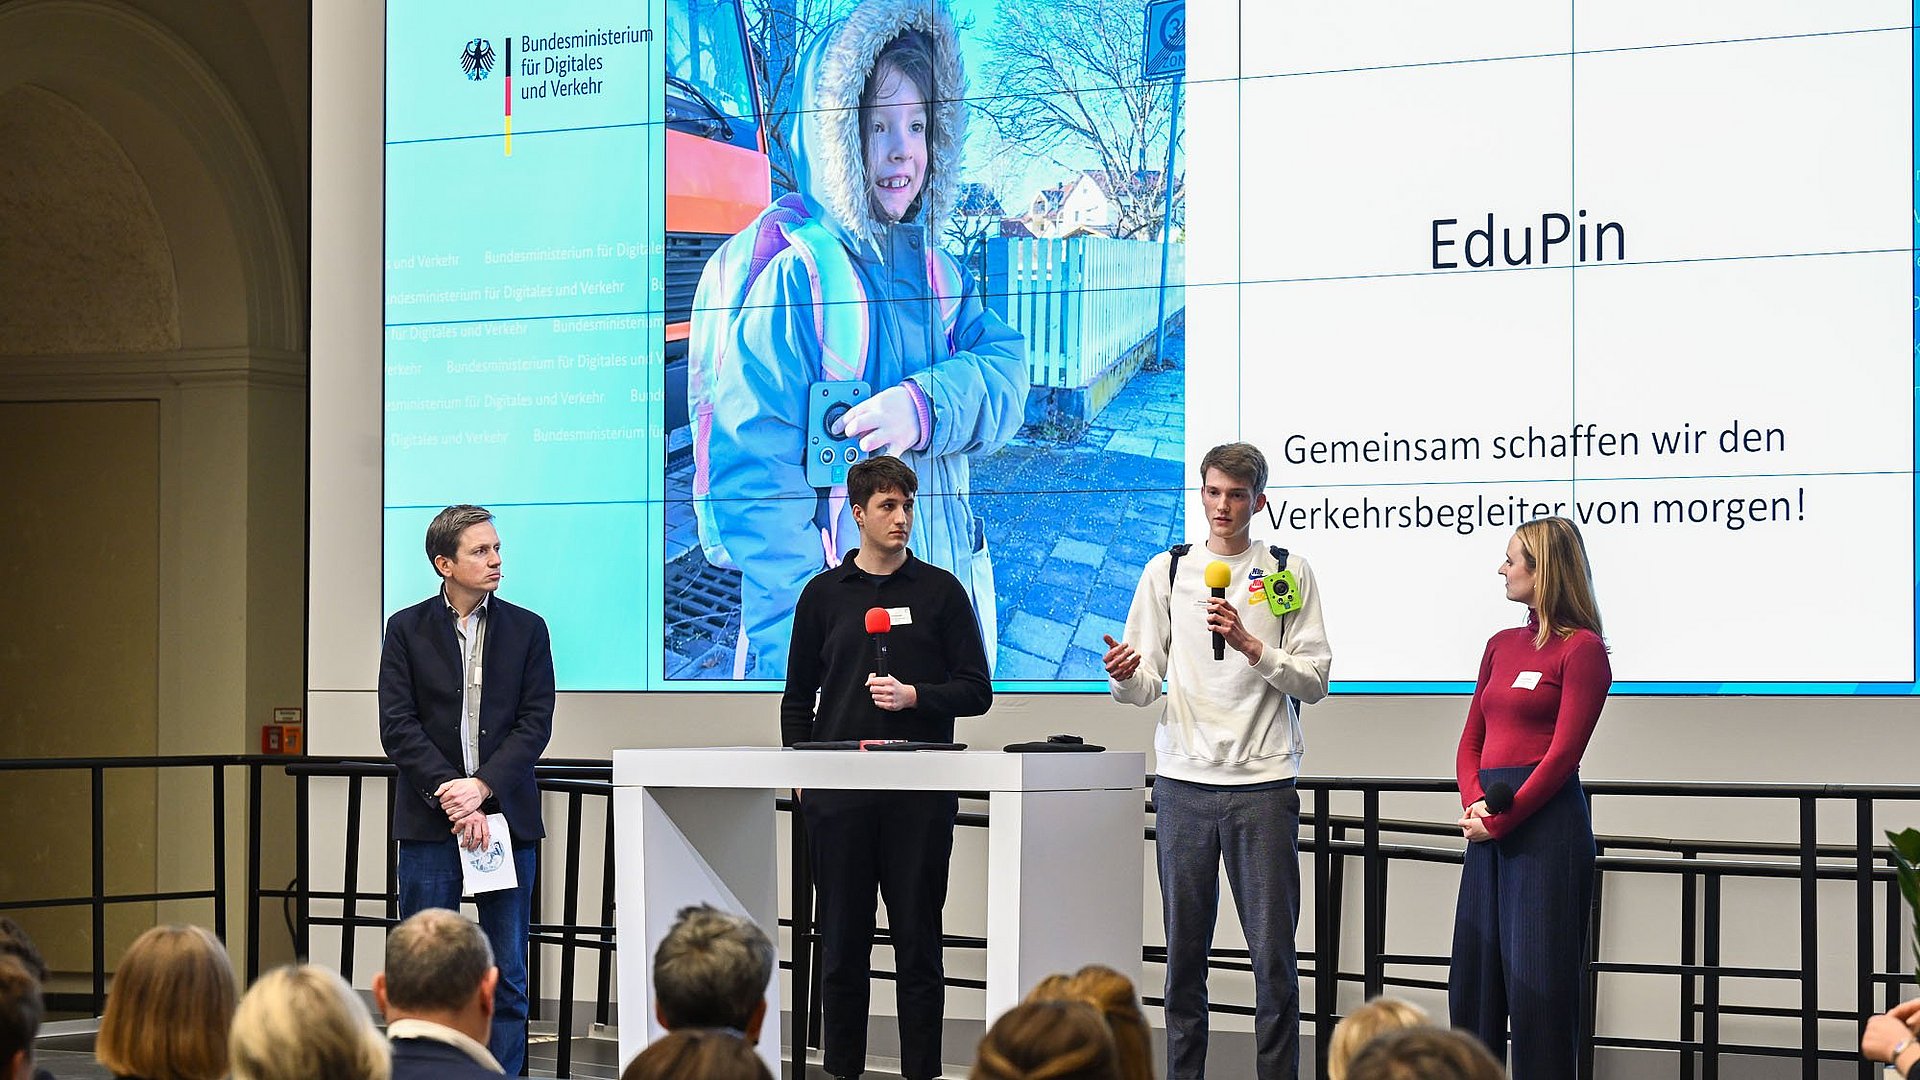 for Digital and Transport presenting their concept to the audience, behind them a presentation projected onto the wall showing a child wearing a prototype of the EduPin on the strap of his backpack and handling it, as well as the words "EduPin. Together we are creating the transportation companion of tomorrow!".